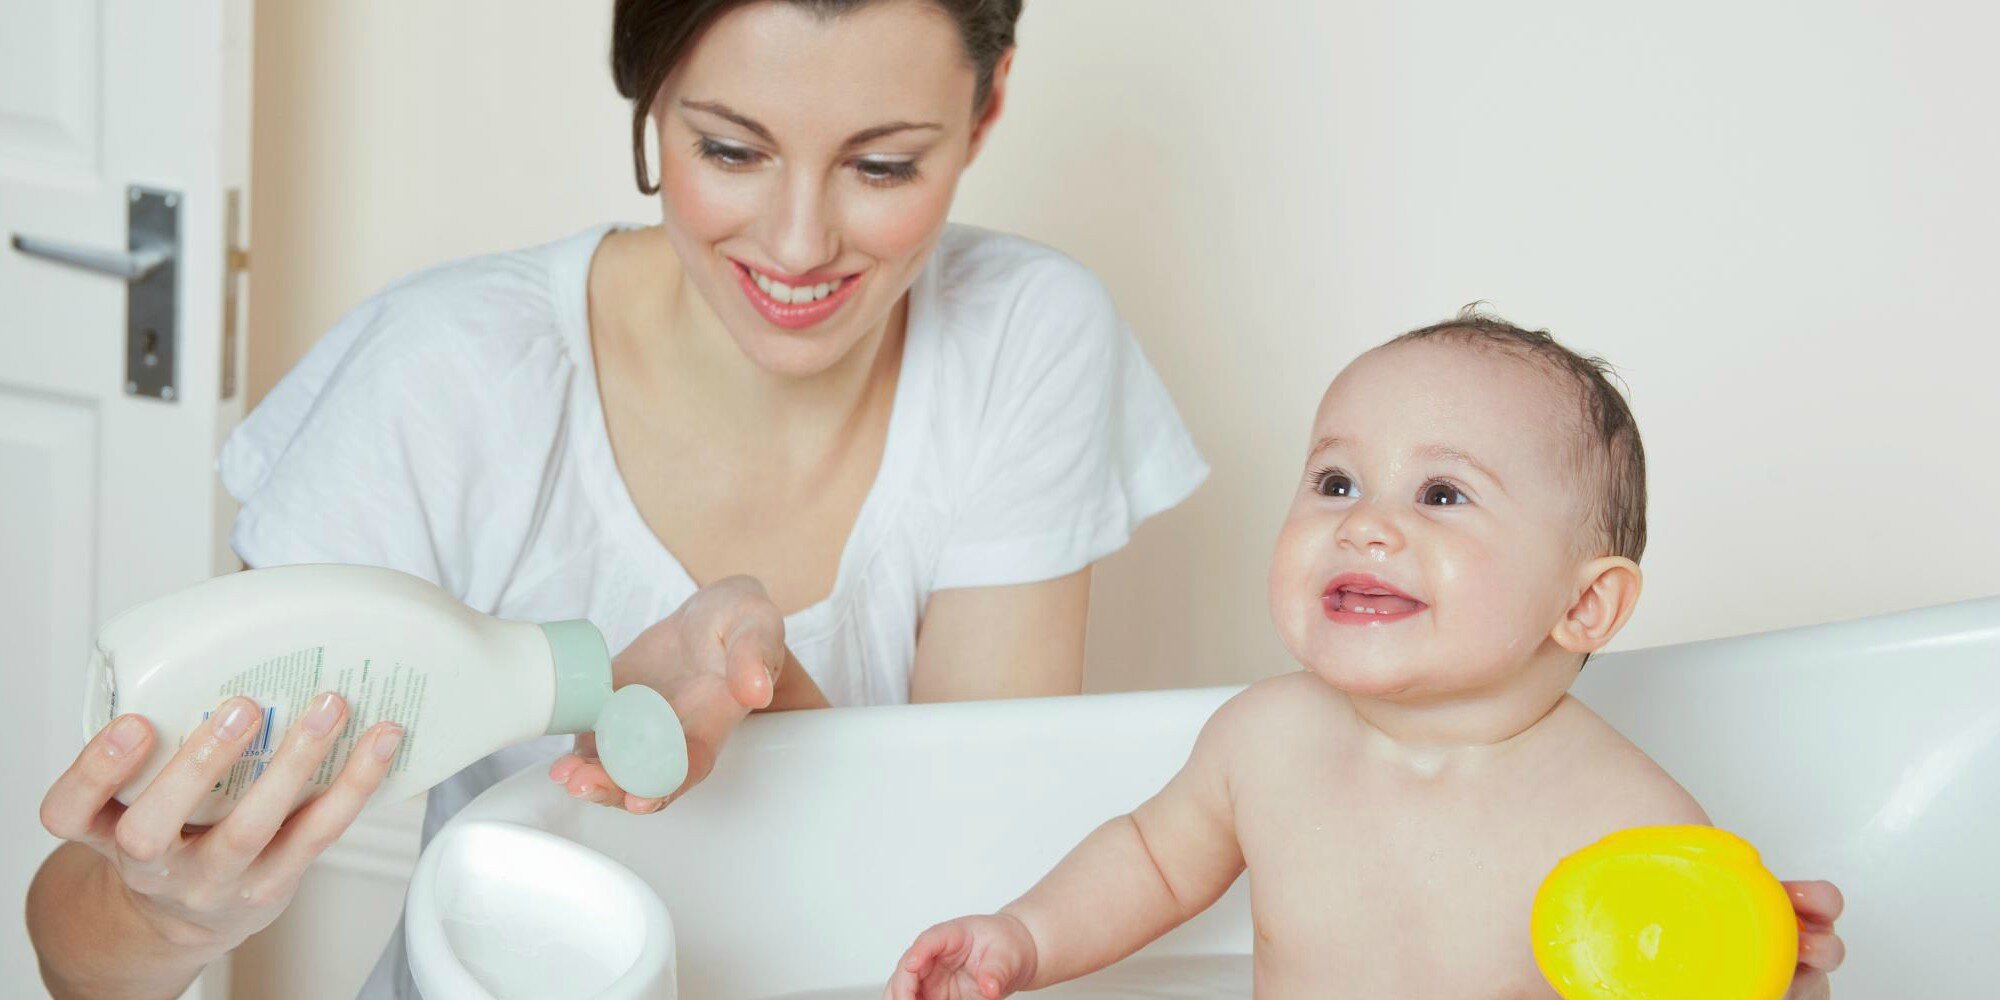 Bathing A Newborn: Guide To All Baby Bath Types